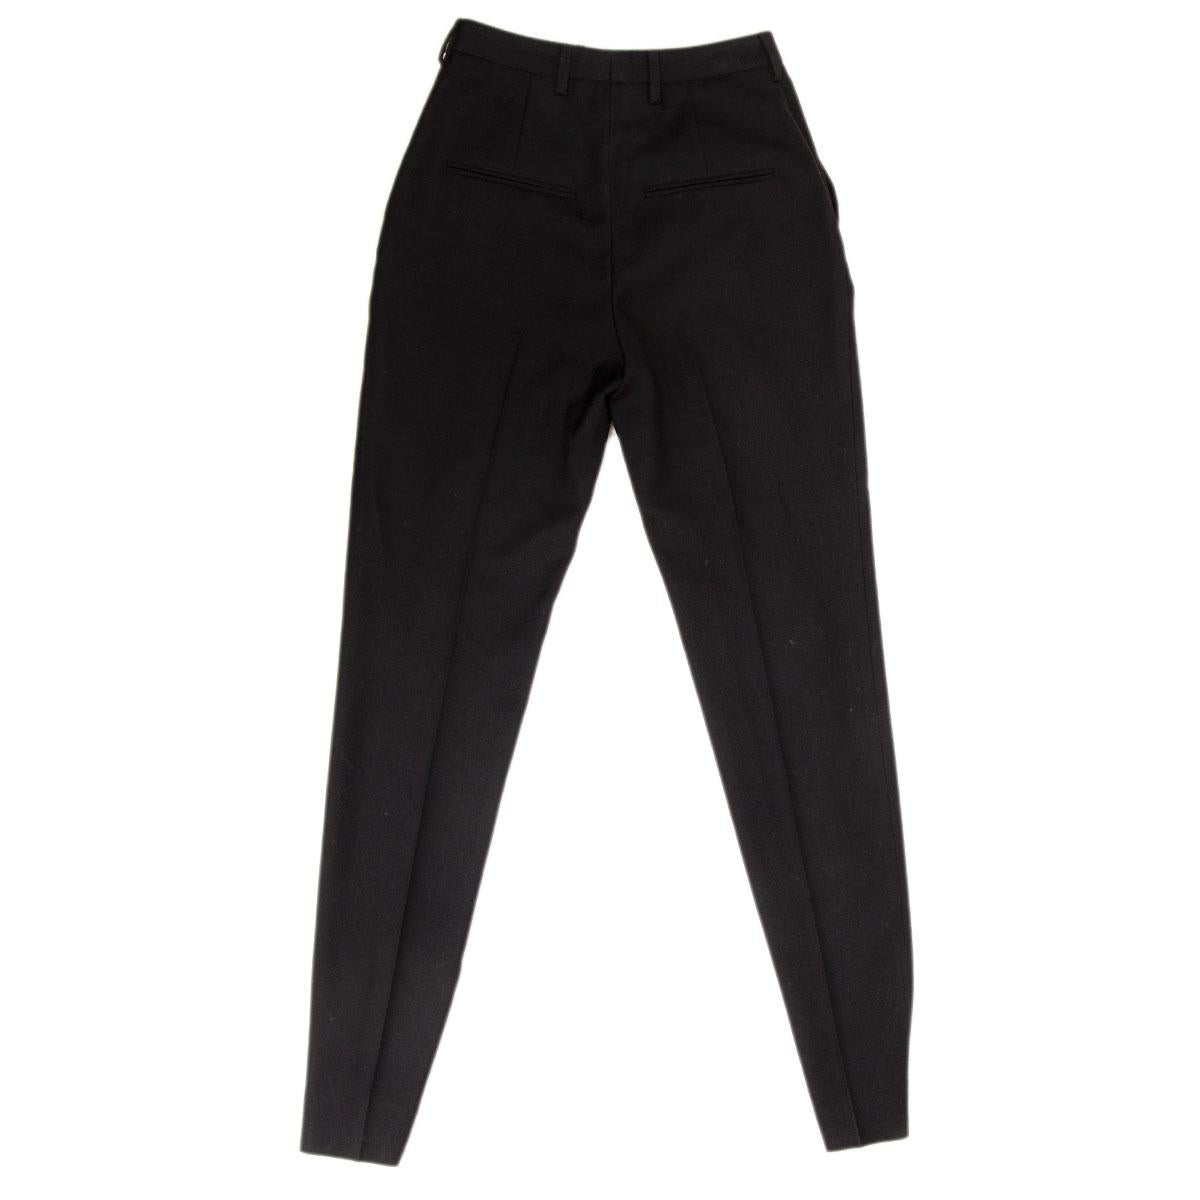 100% authentic Saint Laurent classic pants in black wool (100%) with a slim leg and pleats in the front and back. Has belt loops, pockets in the front. Closes with a concealed hook and button at the waist and a zipper at the cuffs. Have been worn